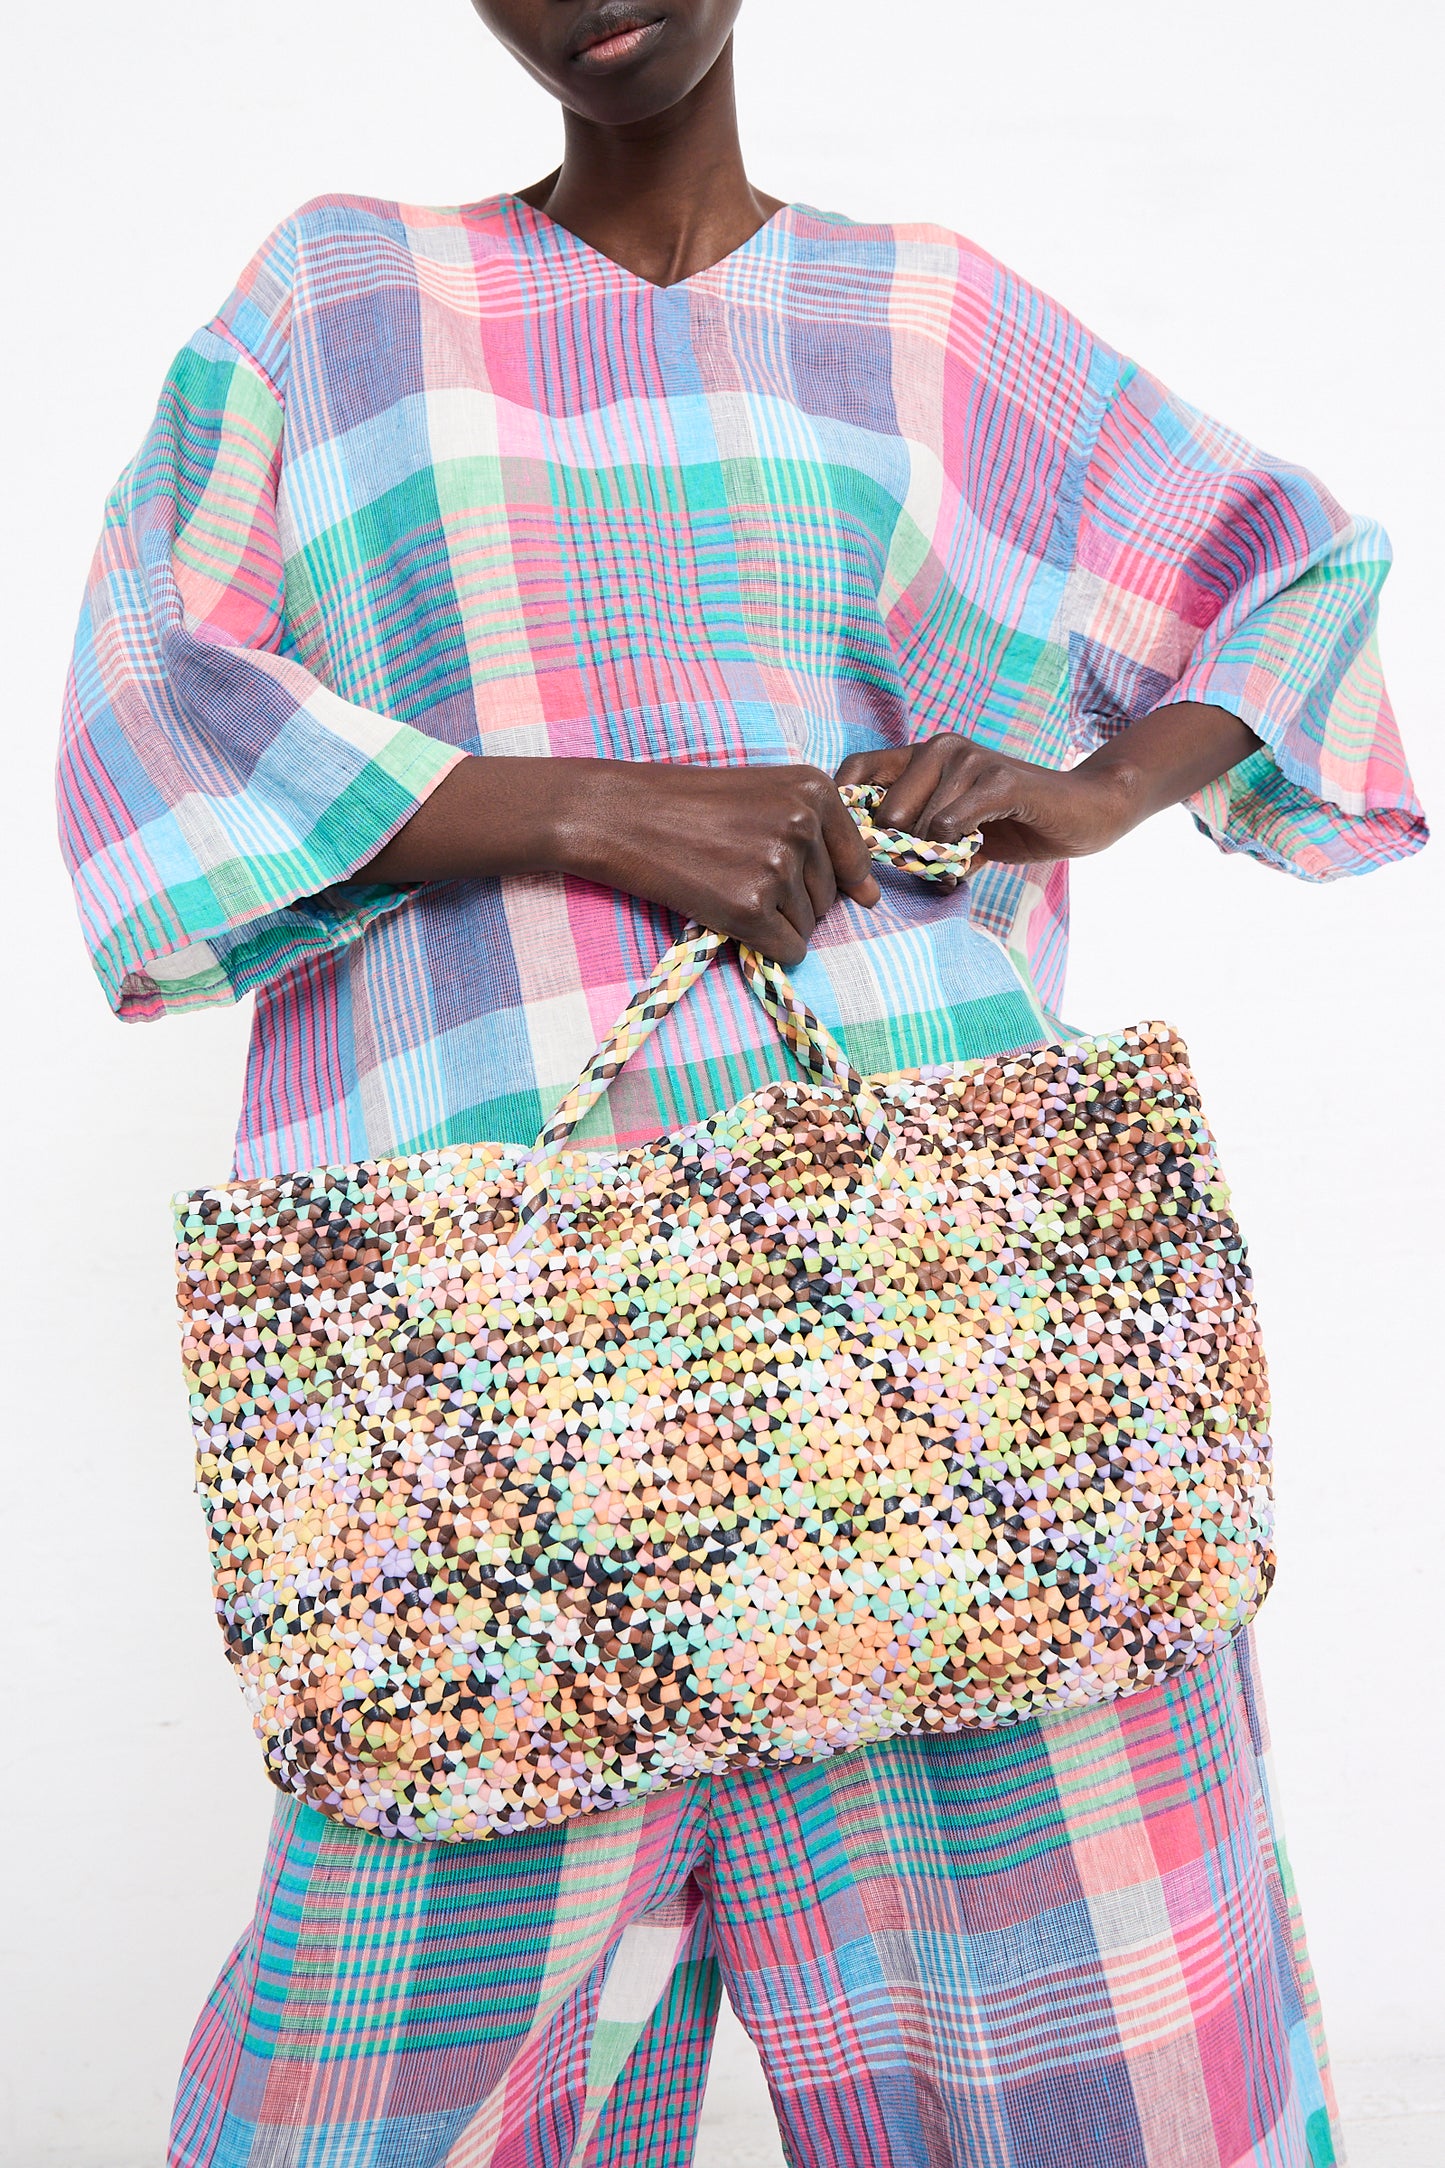 A woman holding a large Octo Multi in Pastel hand-knotted leather tote from Dragon Diffusion, wearing a colorful plaid blouse with voluminous sleeves, against a white background.